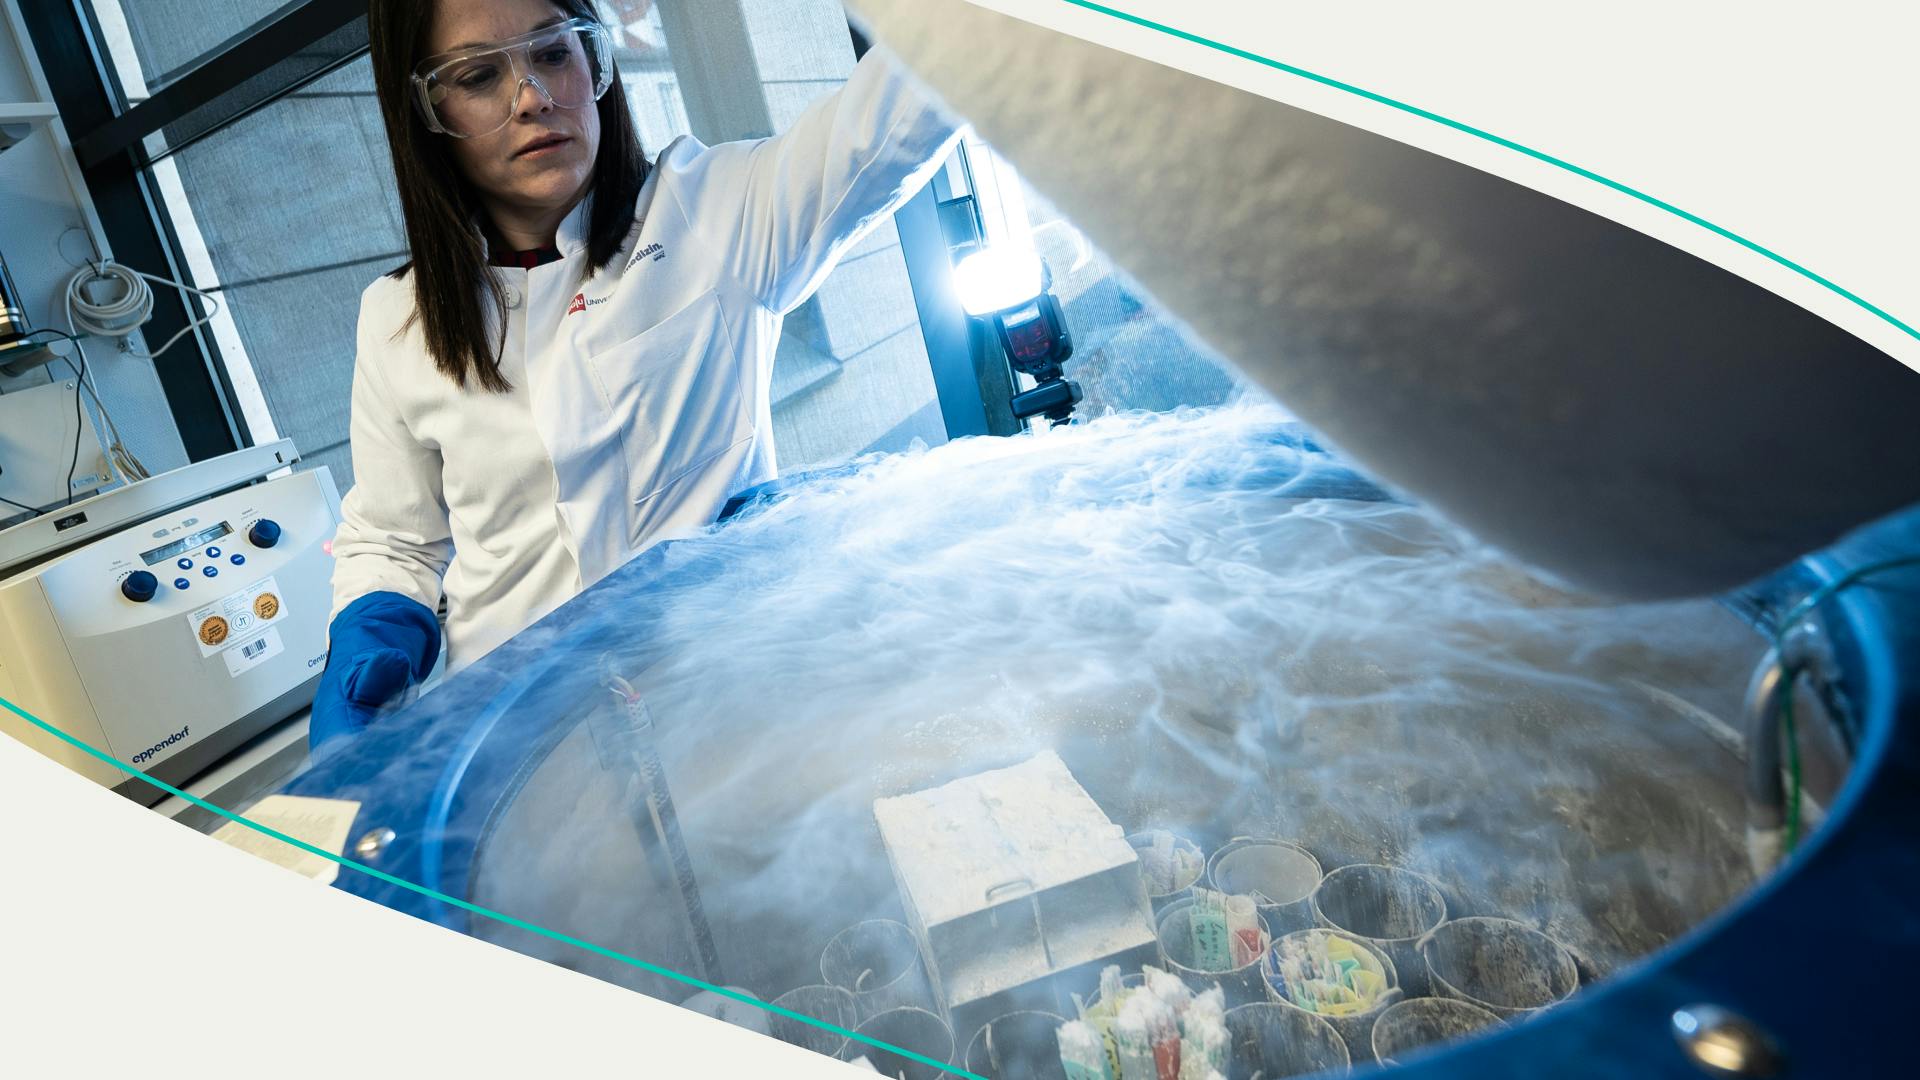 Ruth Gomez, Reproductive Medicine Specialist Head of the Mainz Fertility and PID Centre, stands at a cryotank with frozen sperm and embryos at certain stages.